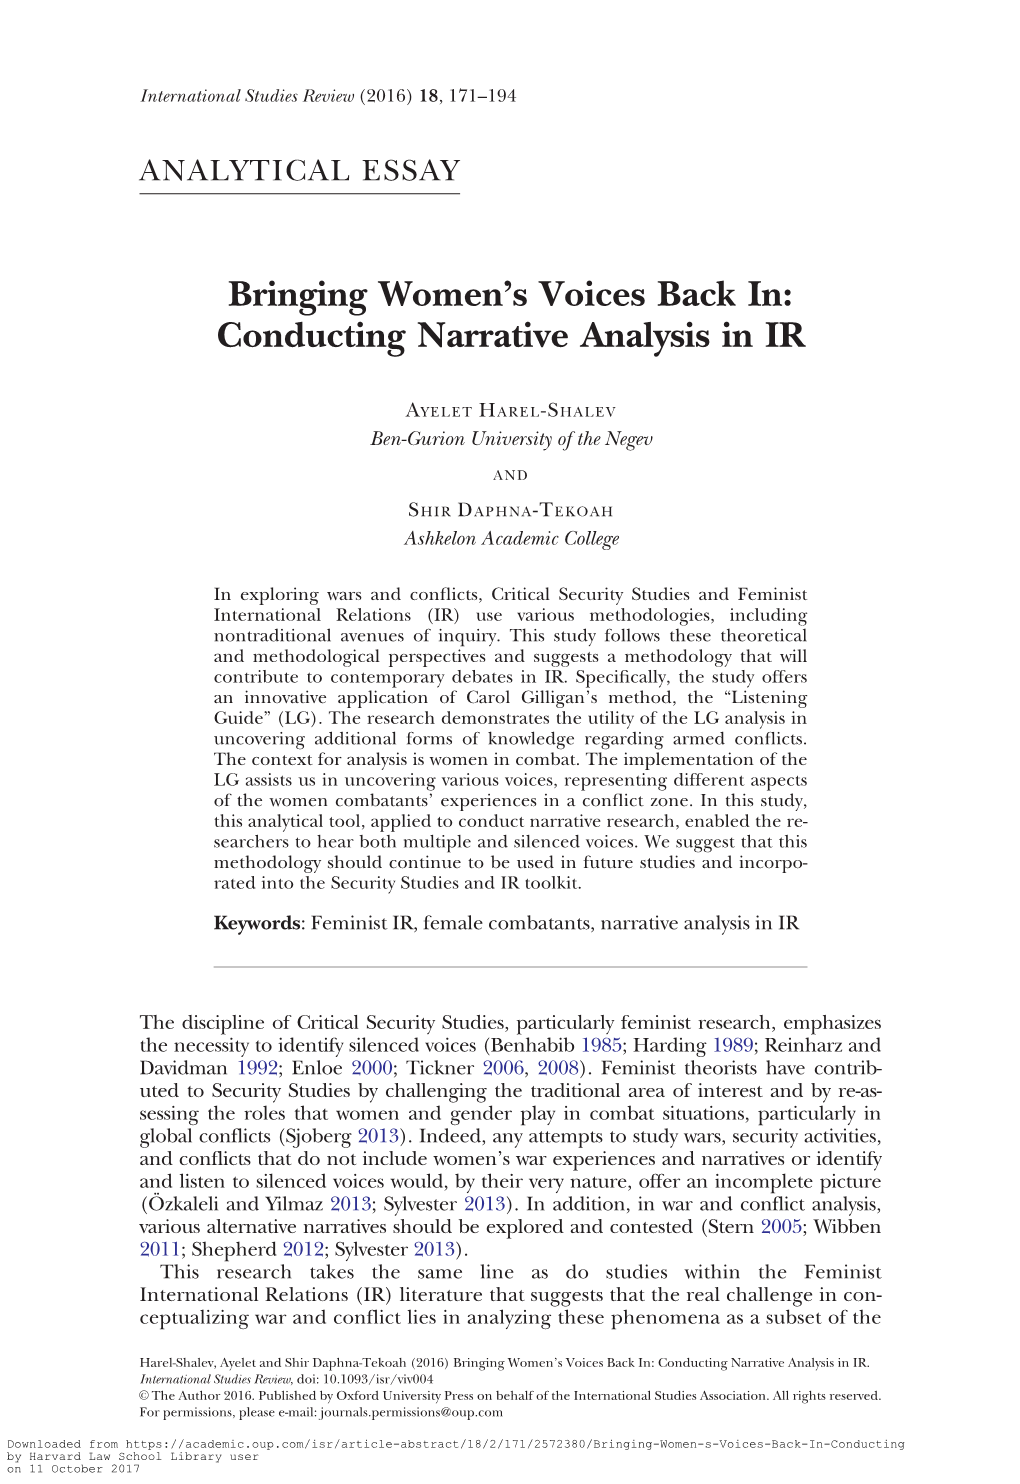 Bringing Women's Voices Back In